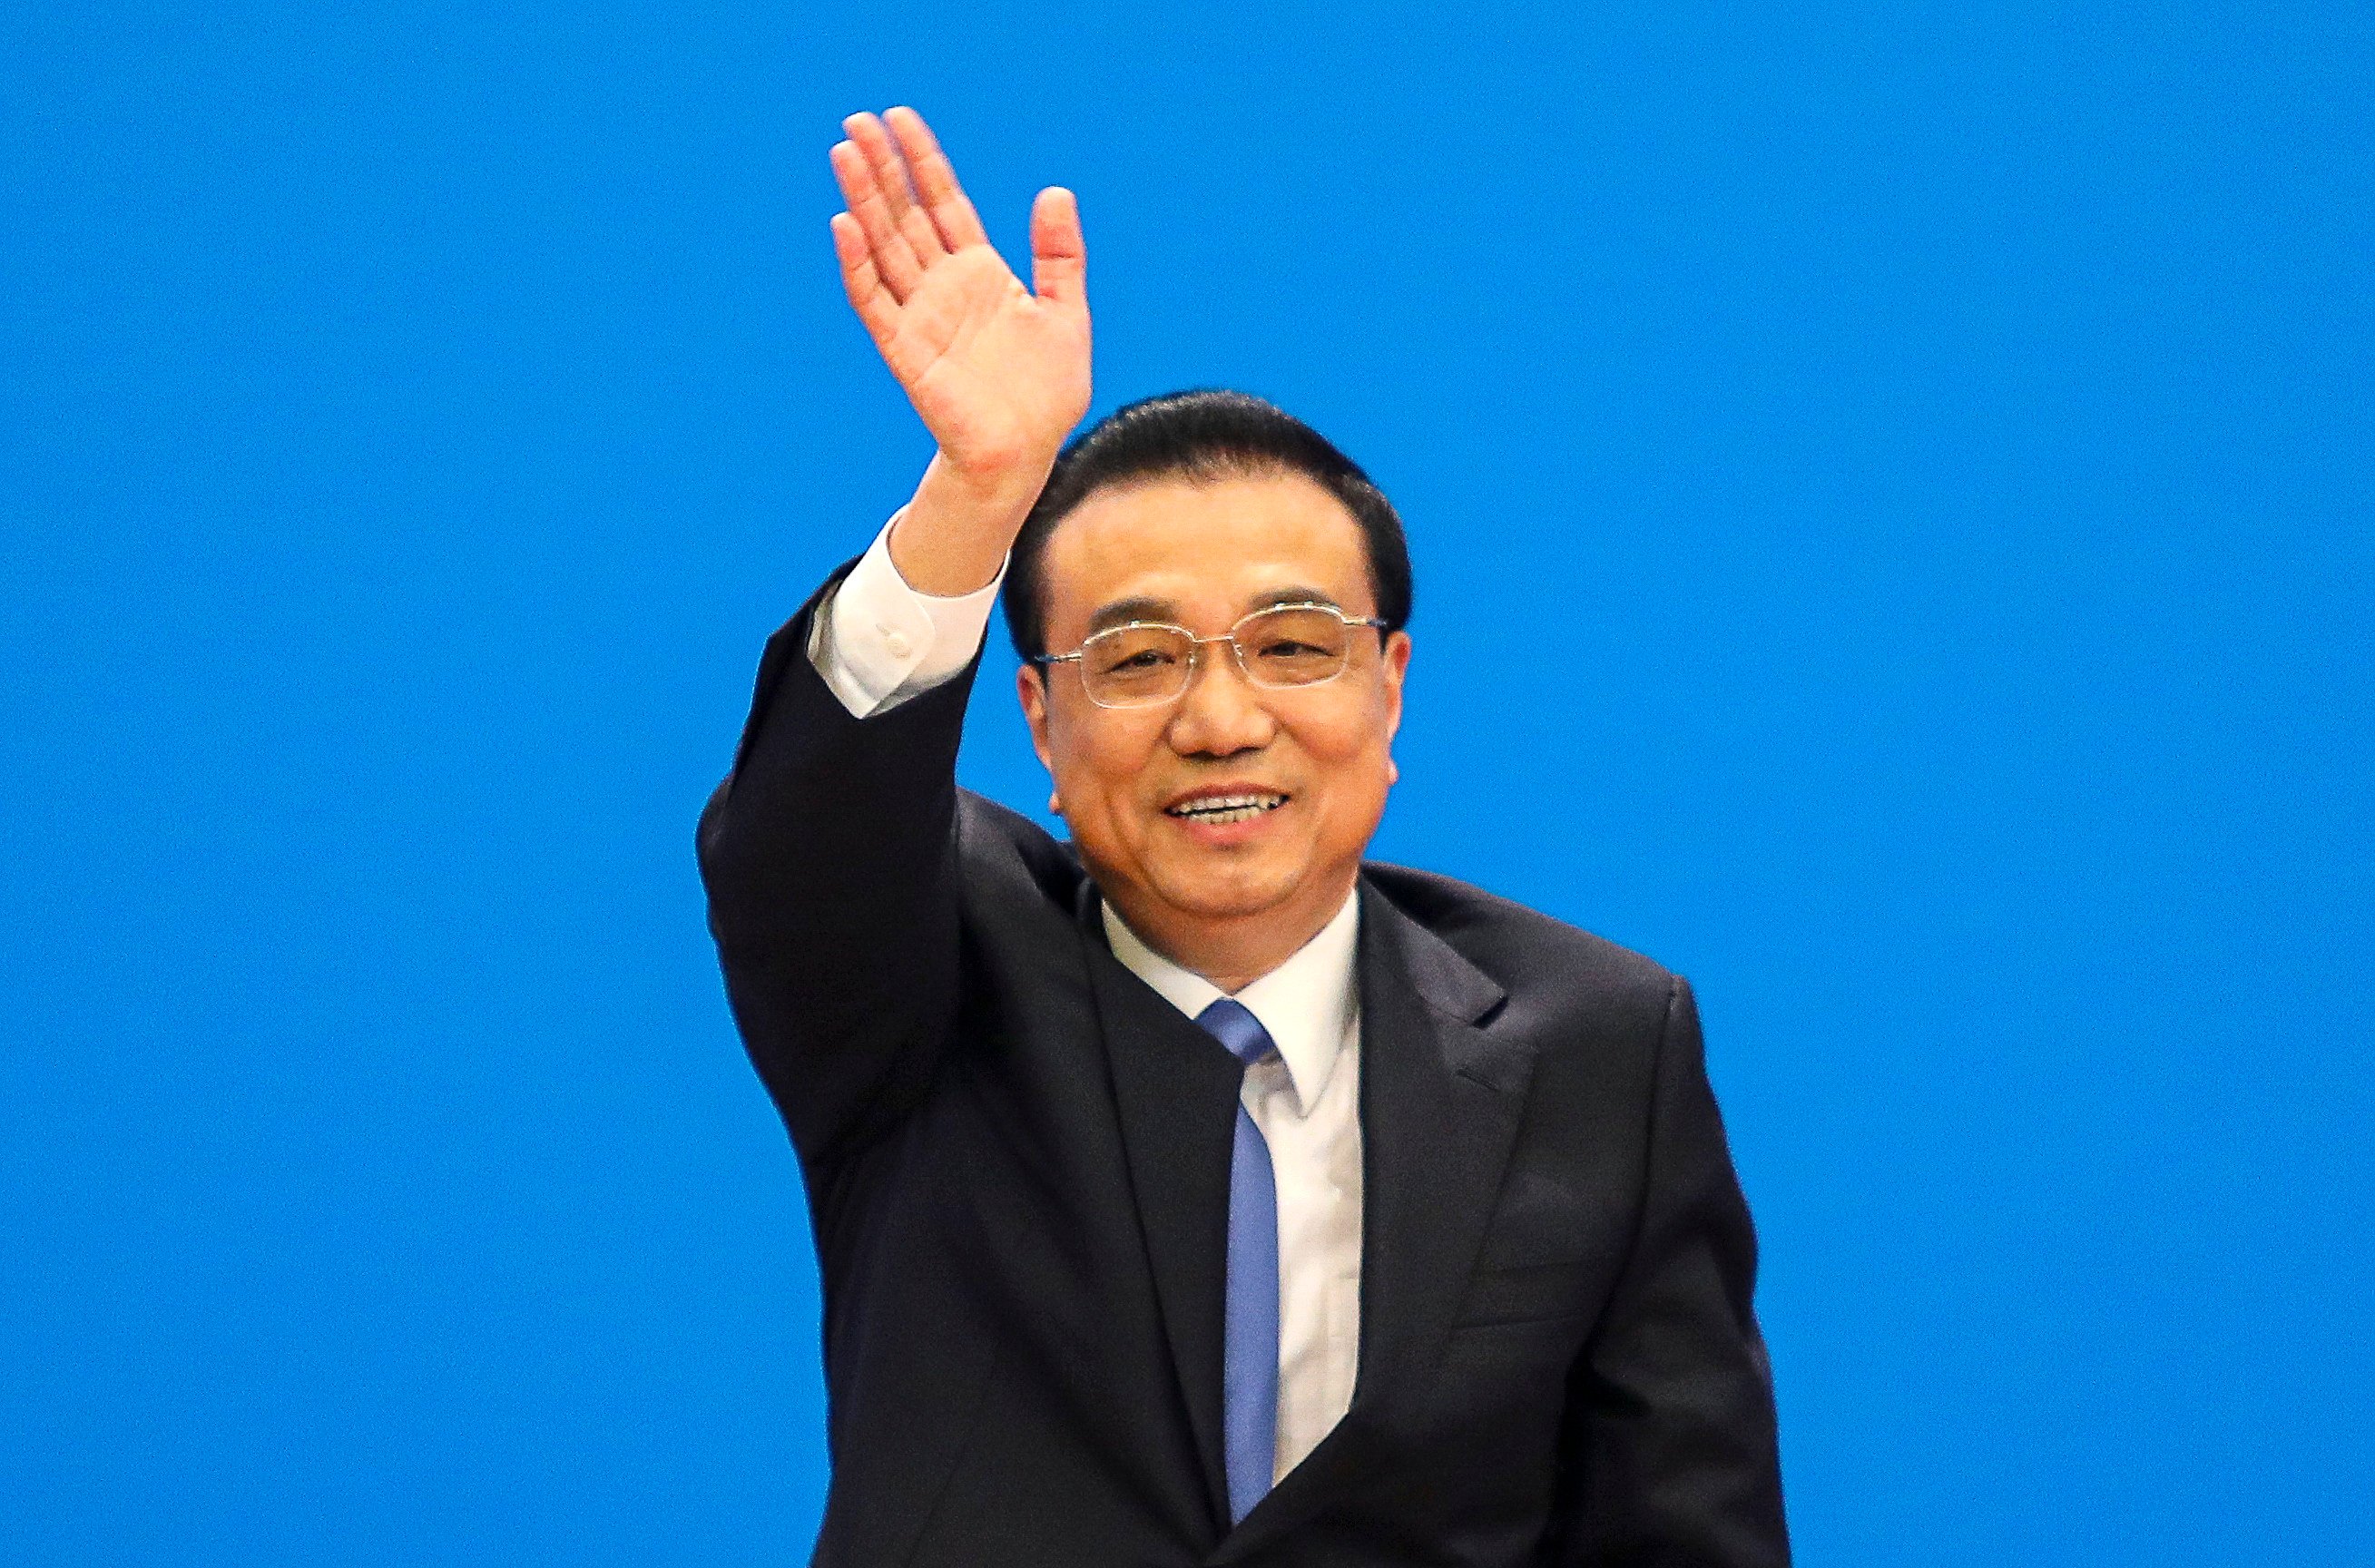 Chinese Premier Li Keqiang was expected to be the chief proponent of China’s economic reforms, but his power waned over the past decade. Photo: Simon Song